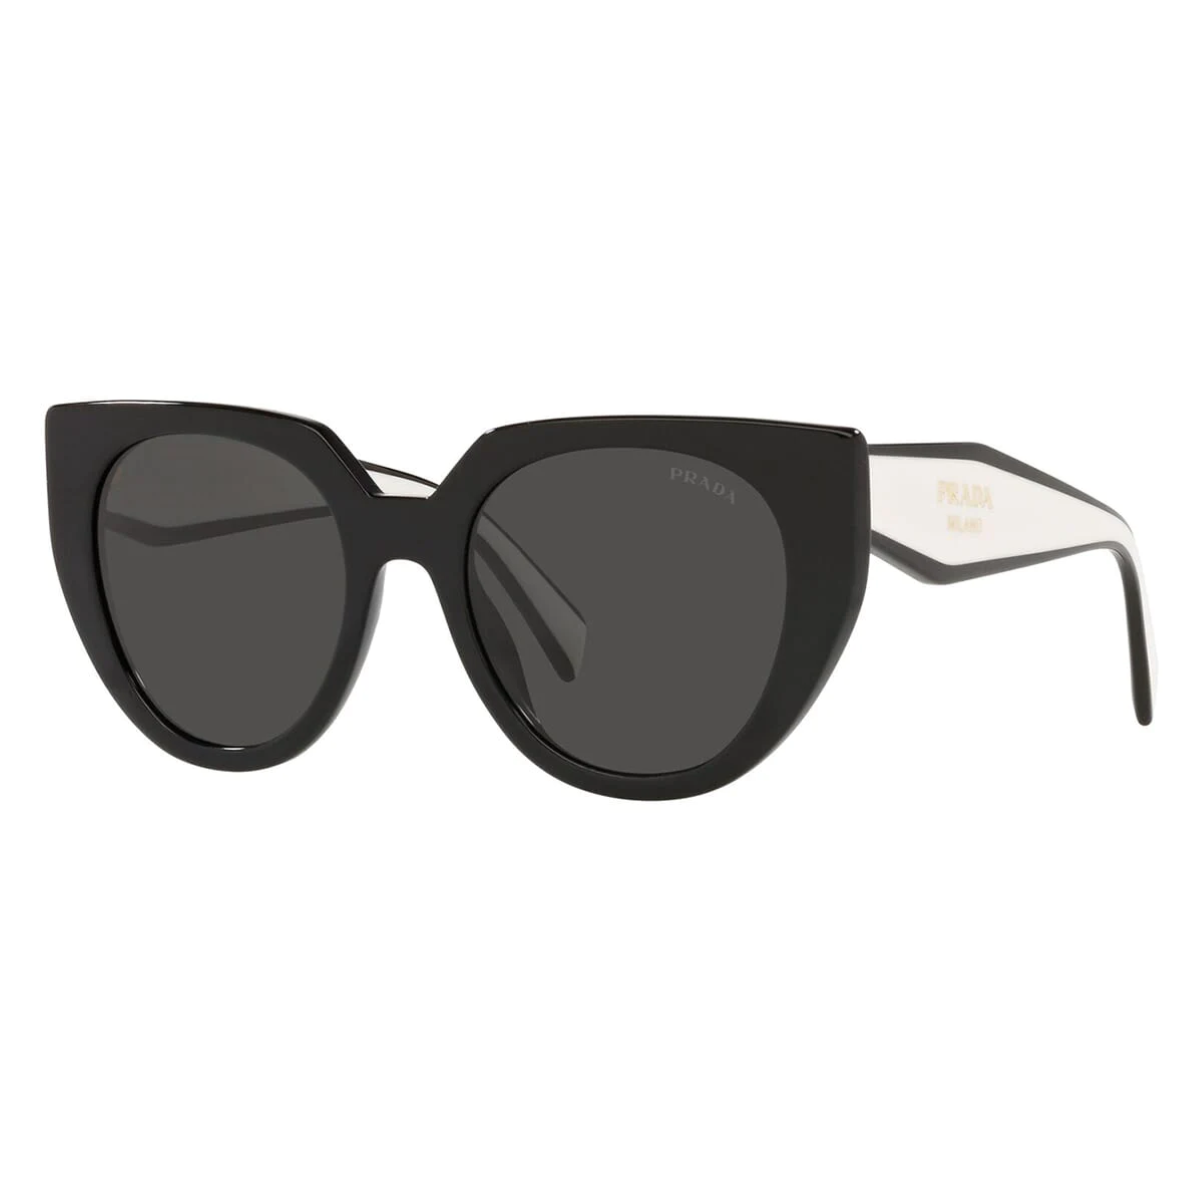 "Prada cat eye shades in shiny black with grey lenses, a must-have accessory for ladies who appreciate fashion-forward eyewear, available now at Optorium."